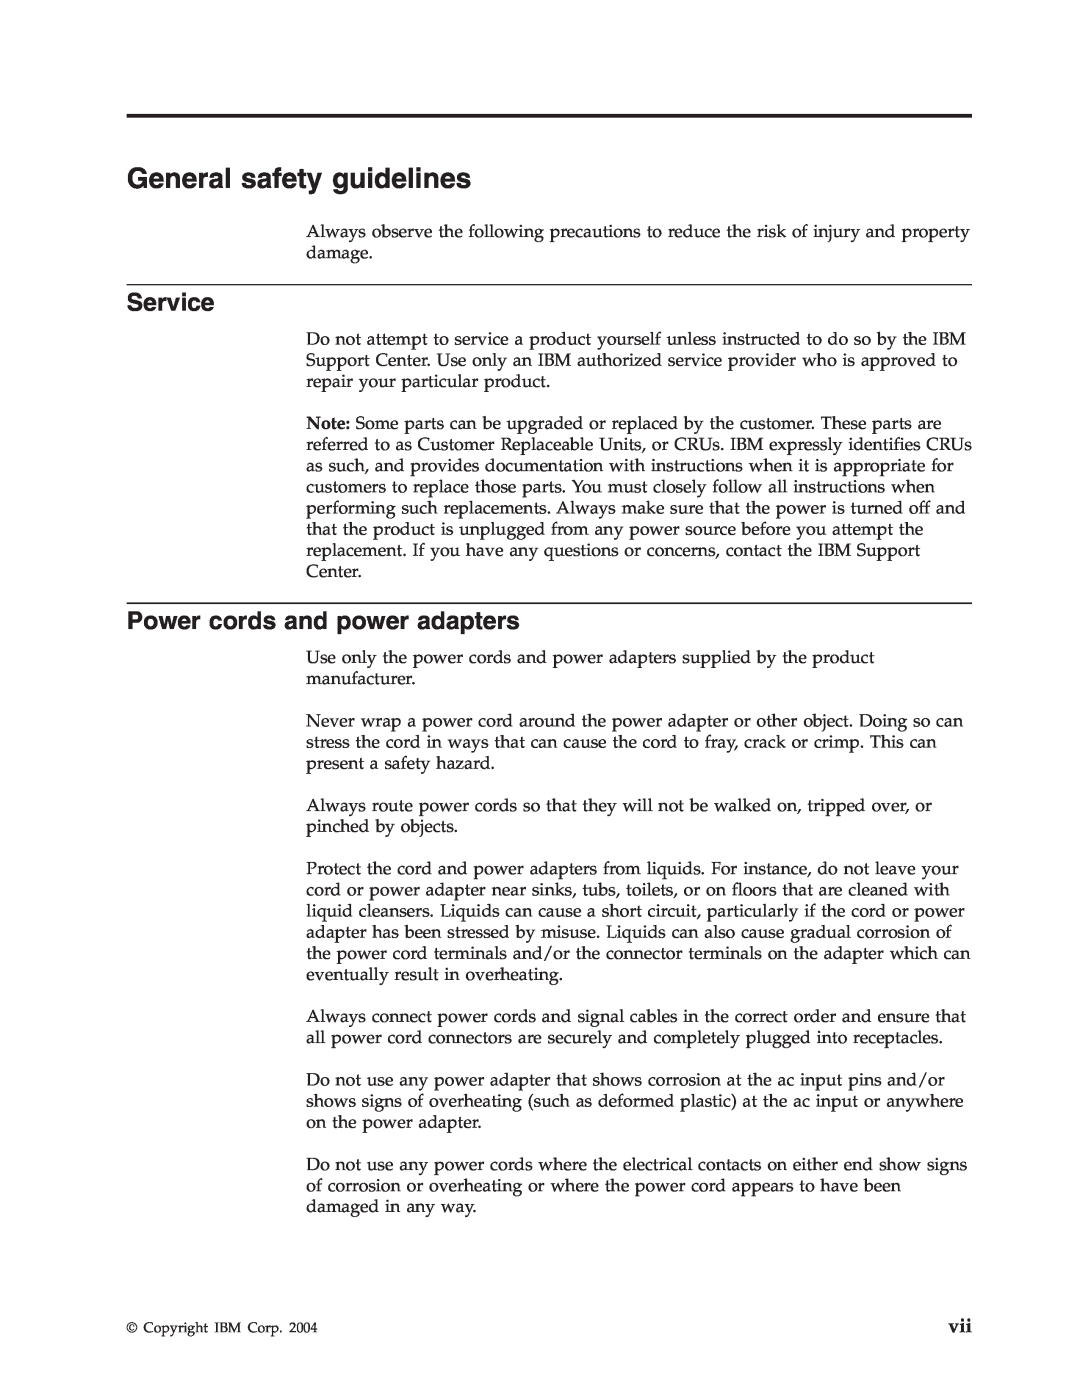 IBM 73P4518 manual General safety guidelines, Service, Power cords and power adapters 